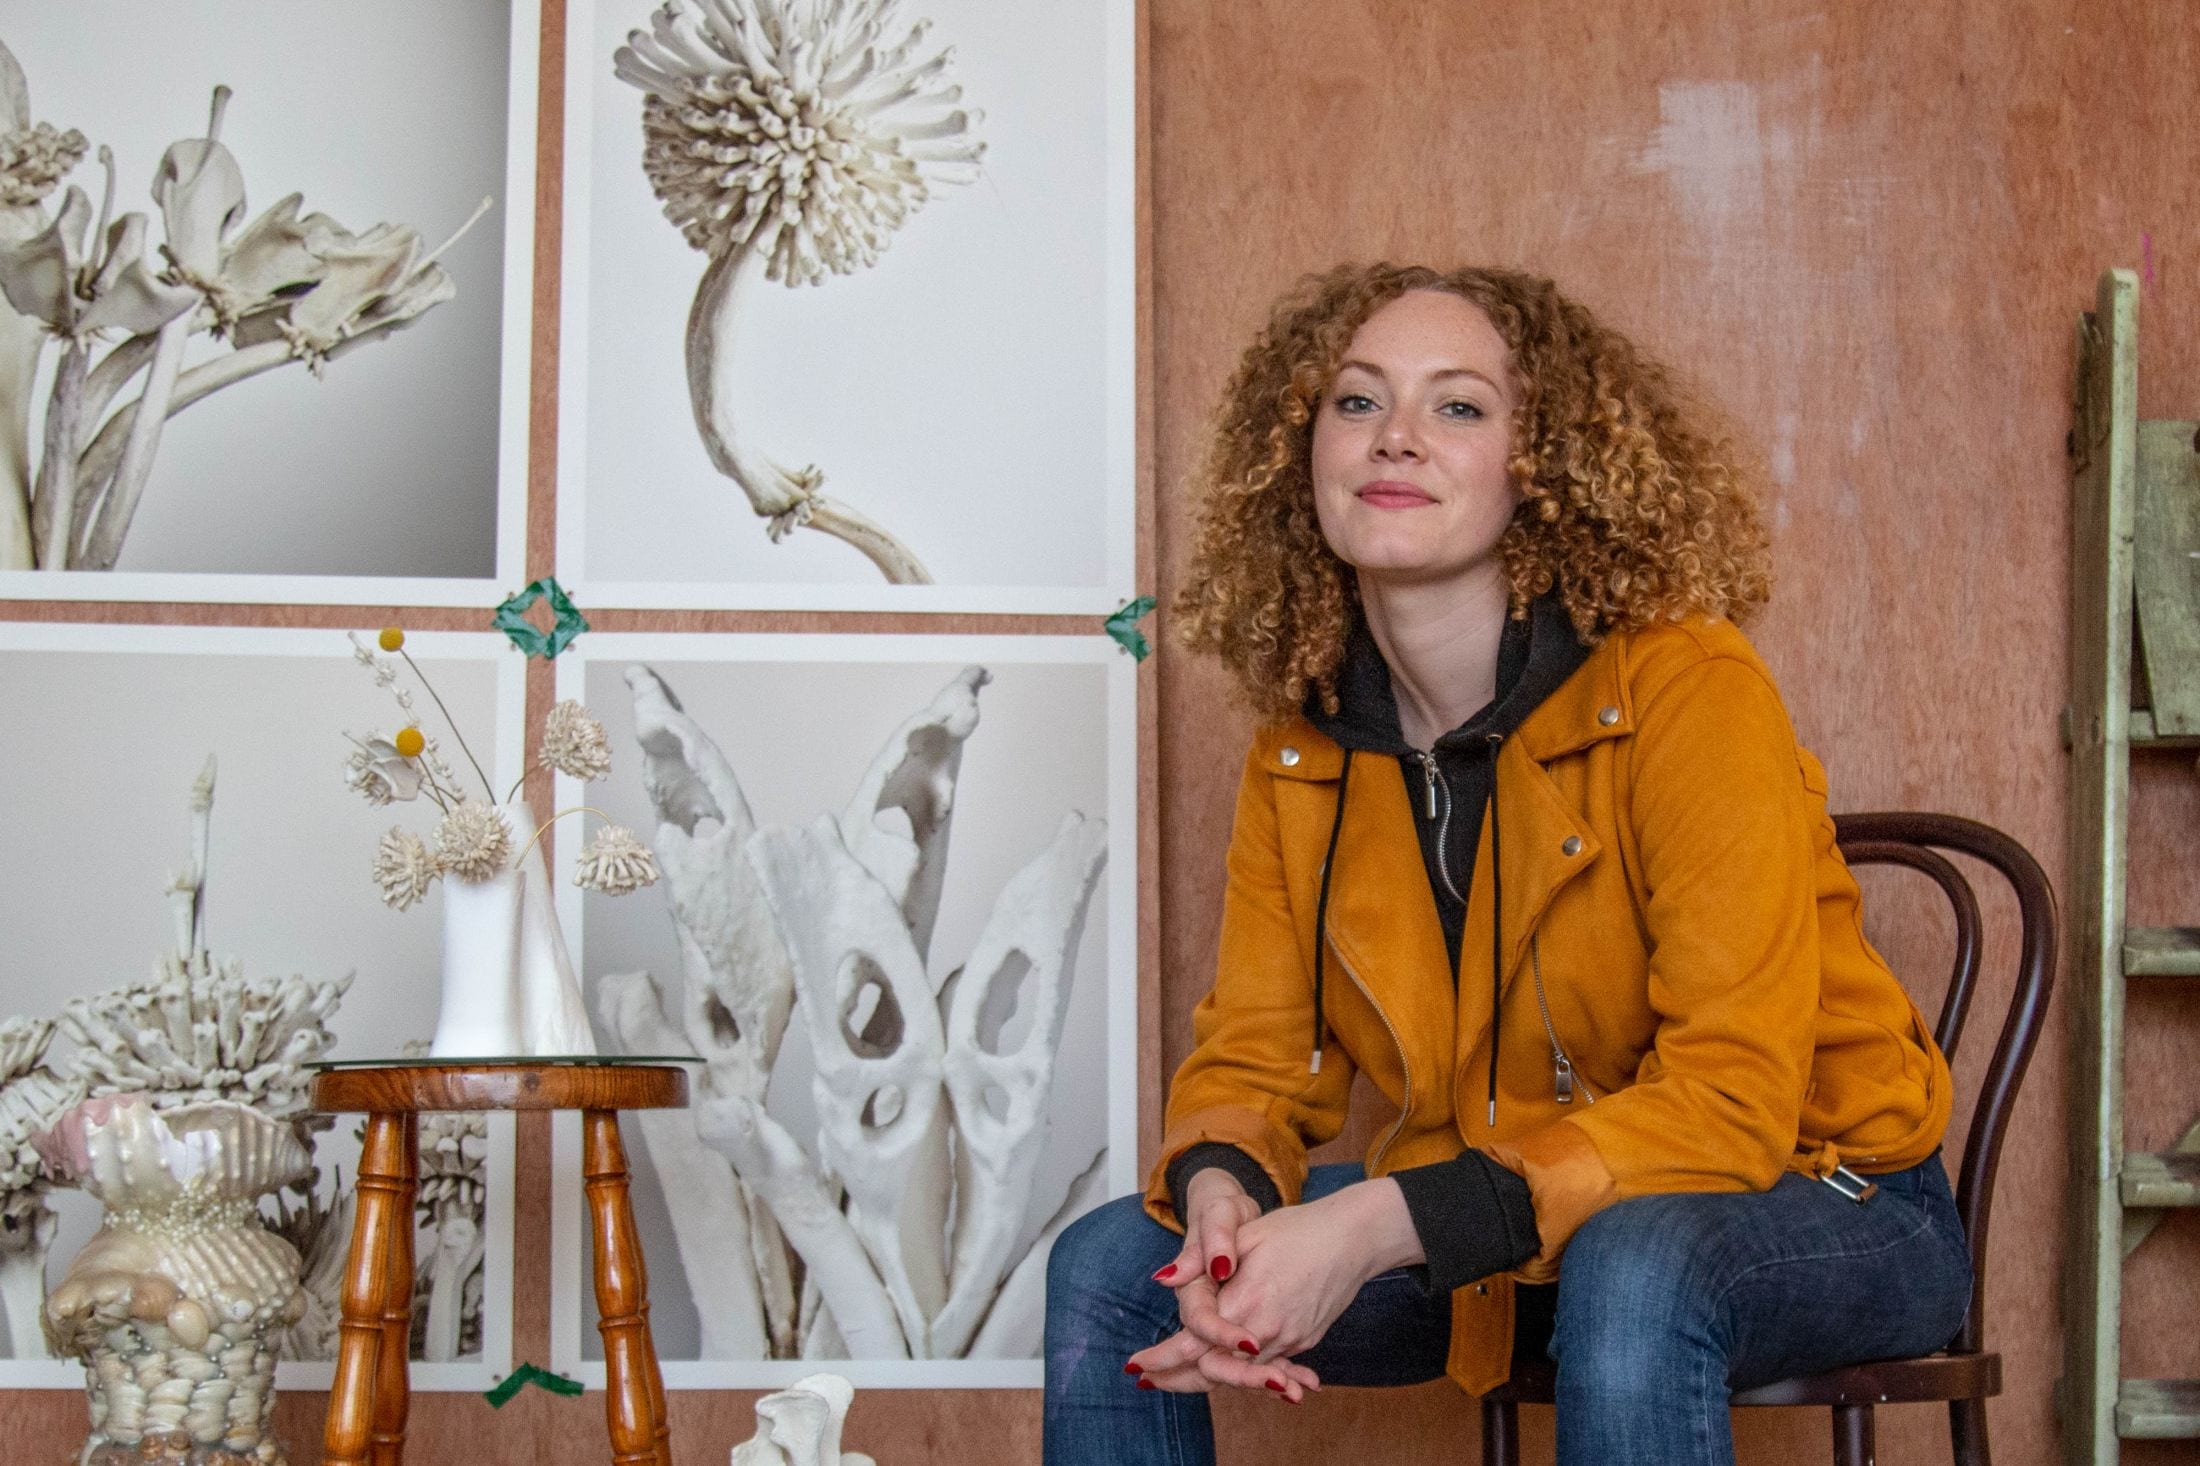 Emma Witter on why she turns discarded animal bones into intricate botanical sculptures